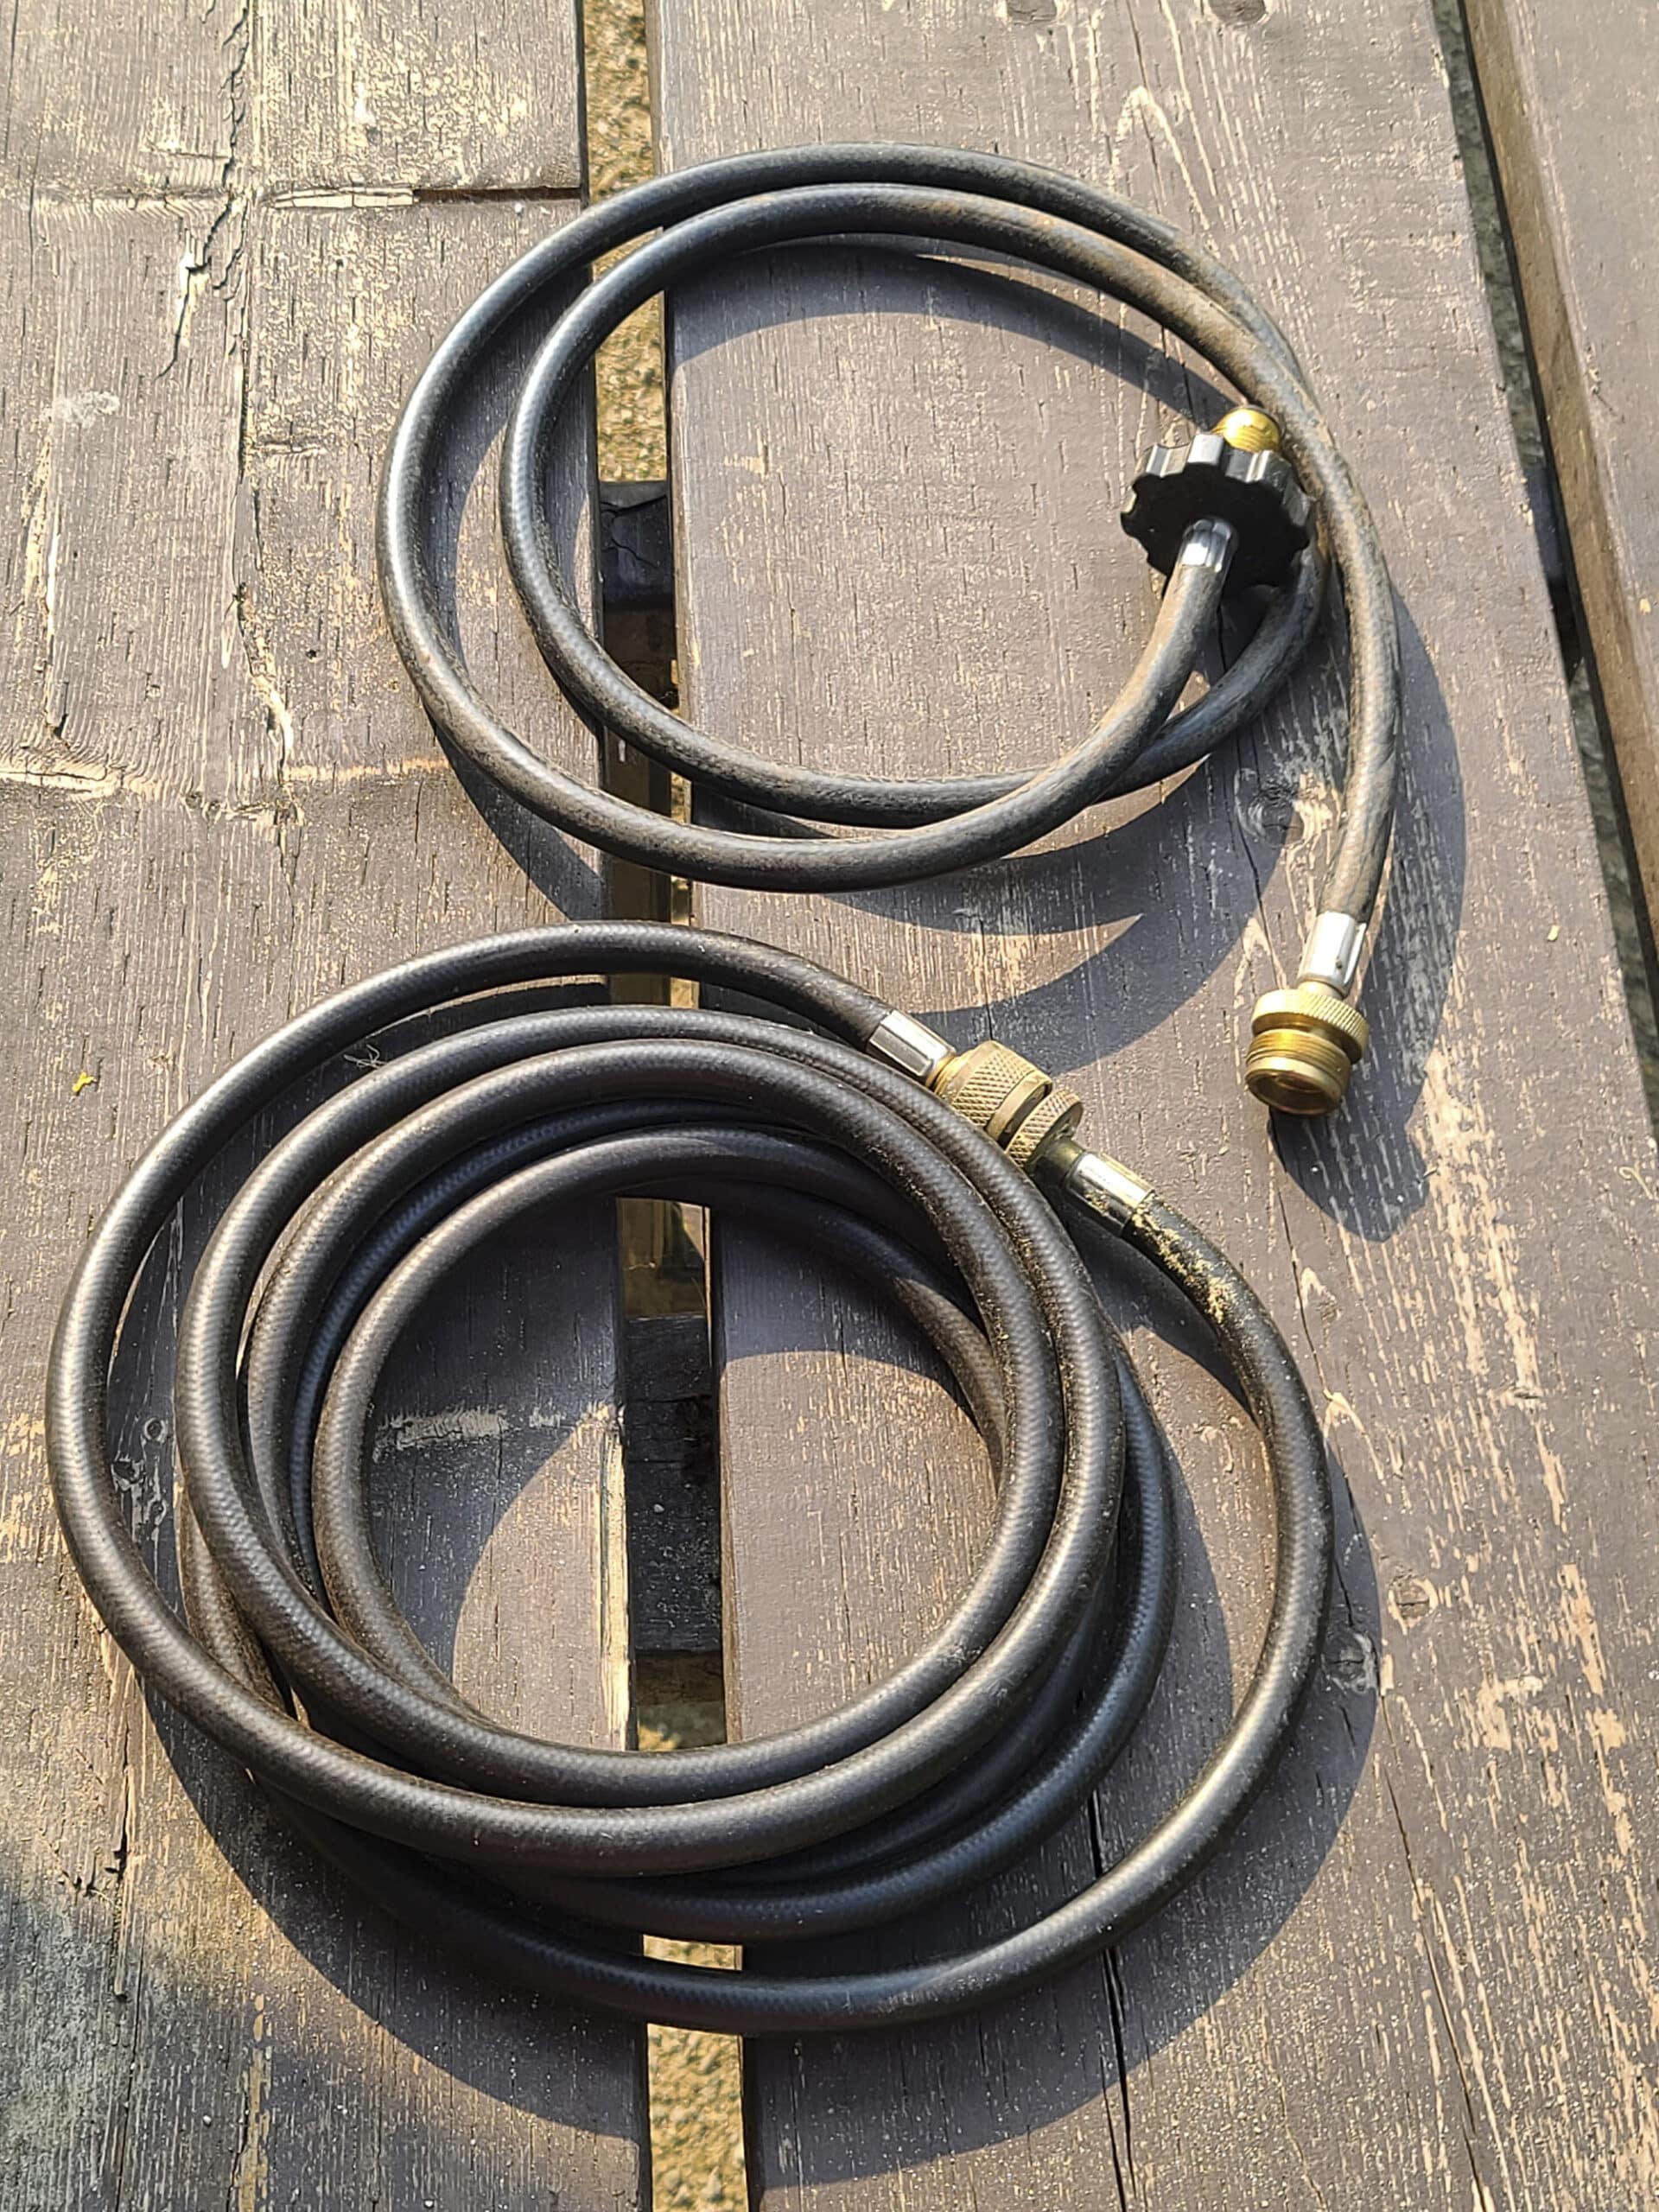 Two black propane hoses are on a table, each coiled up and not connected to anything.